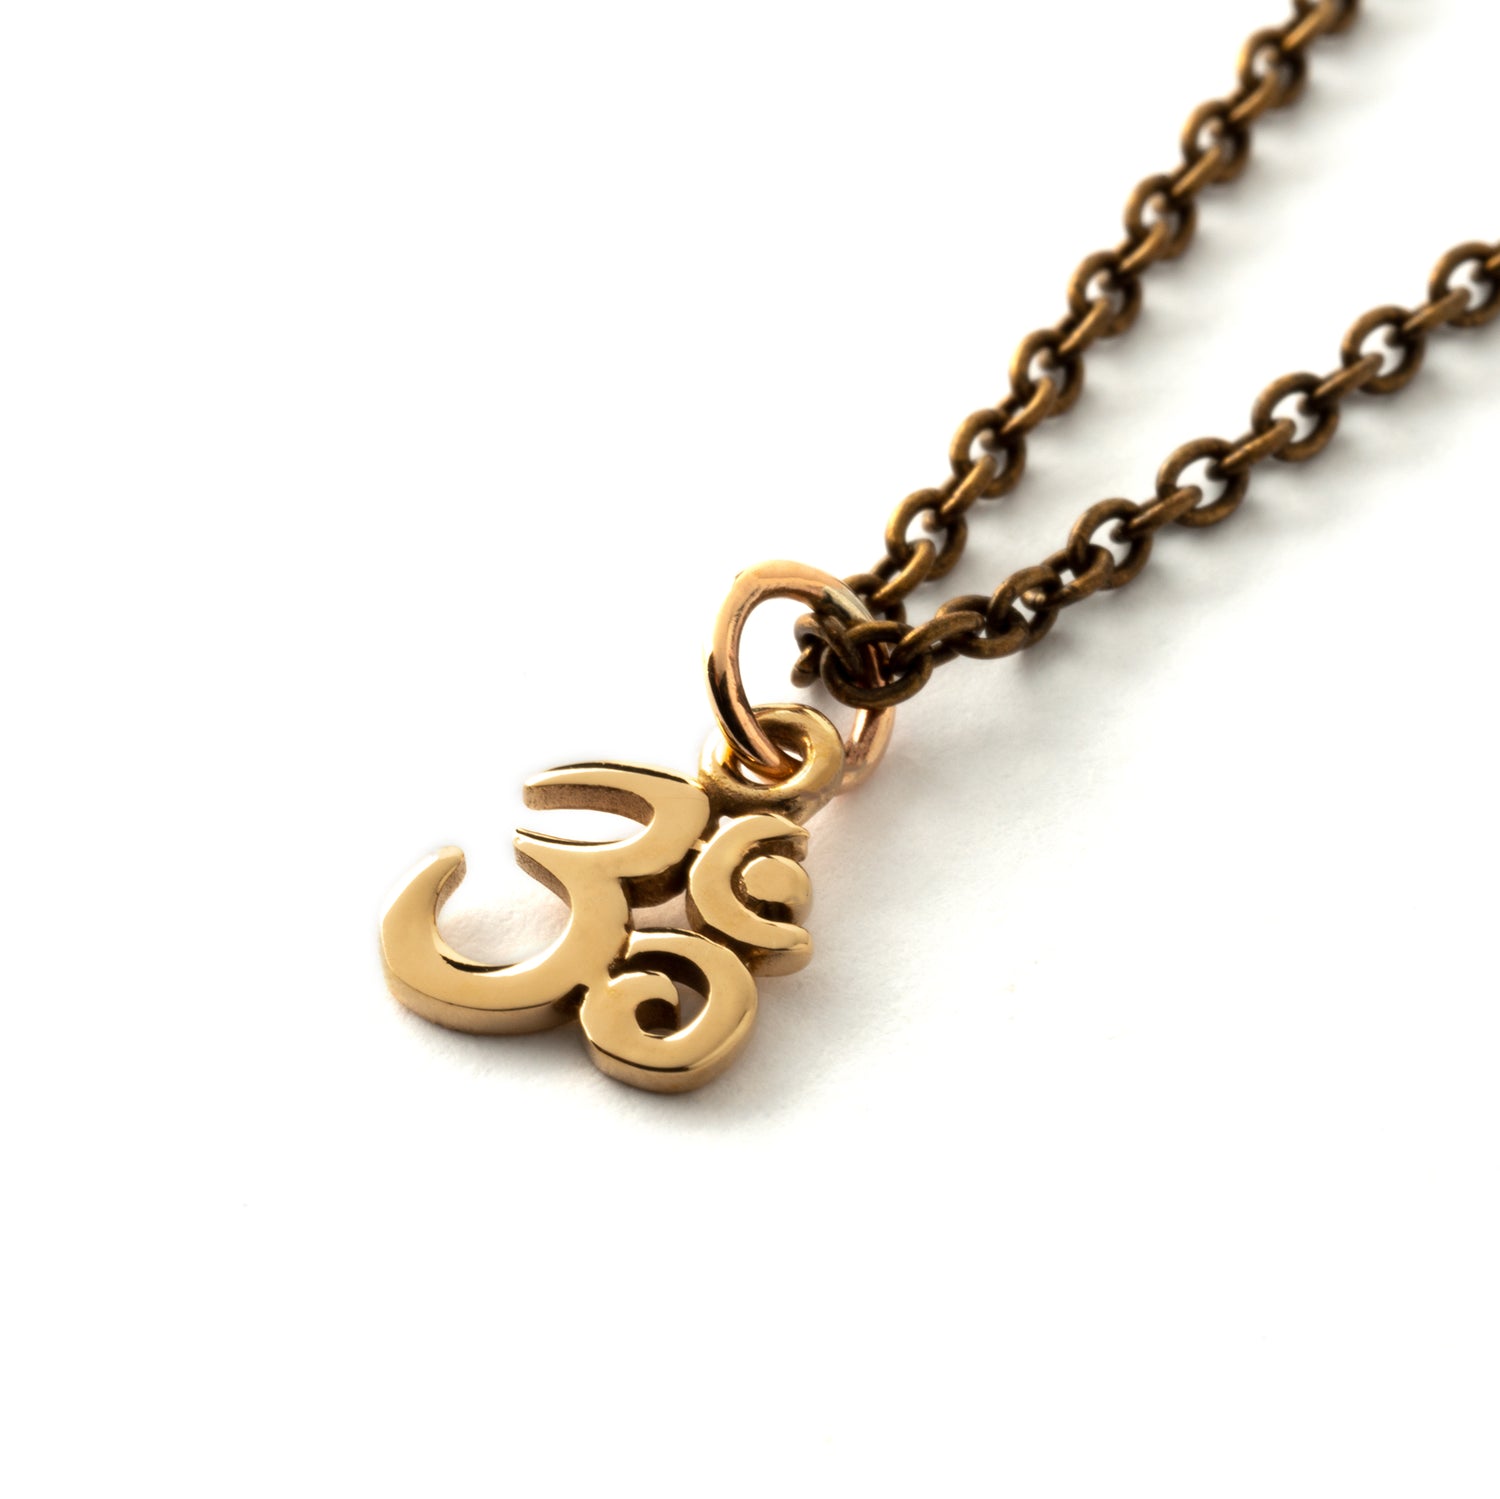 Bronze Petit Om Charm necklace right side view